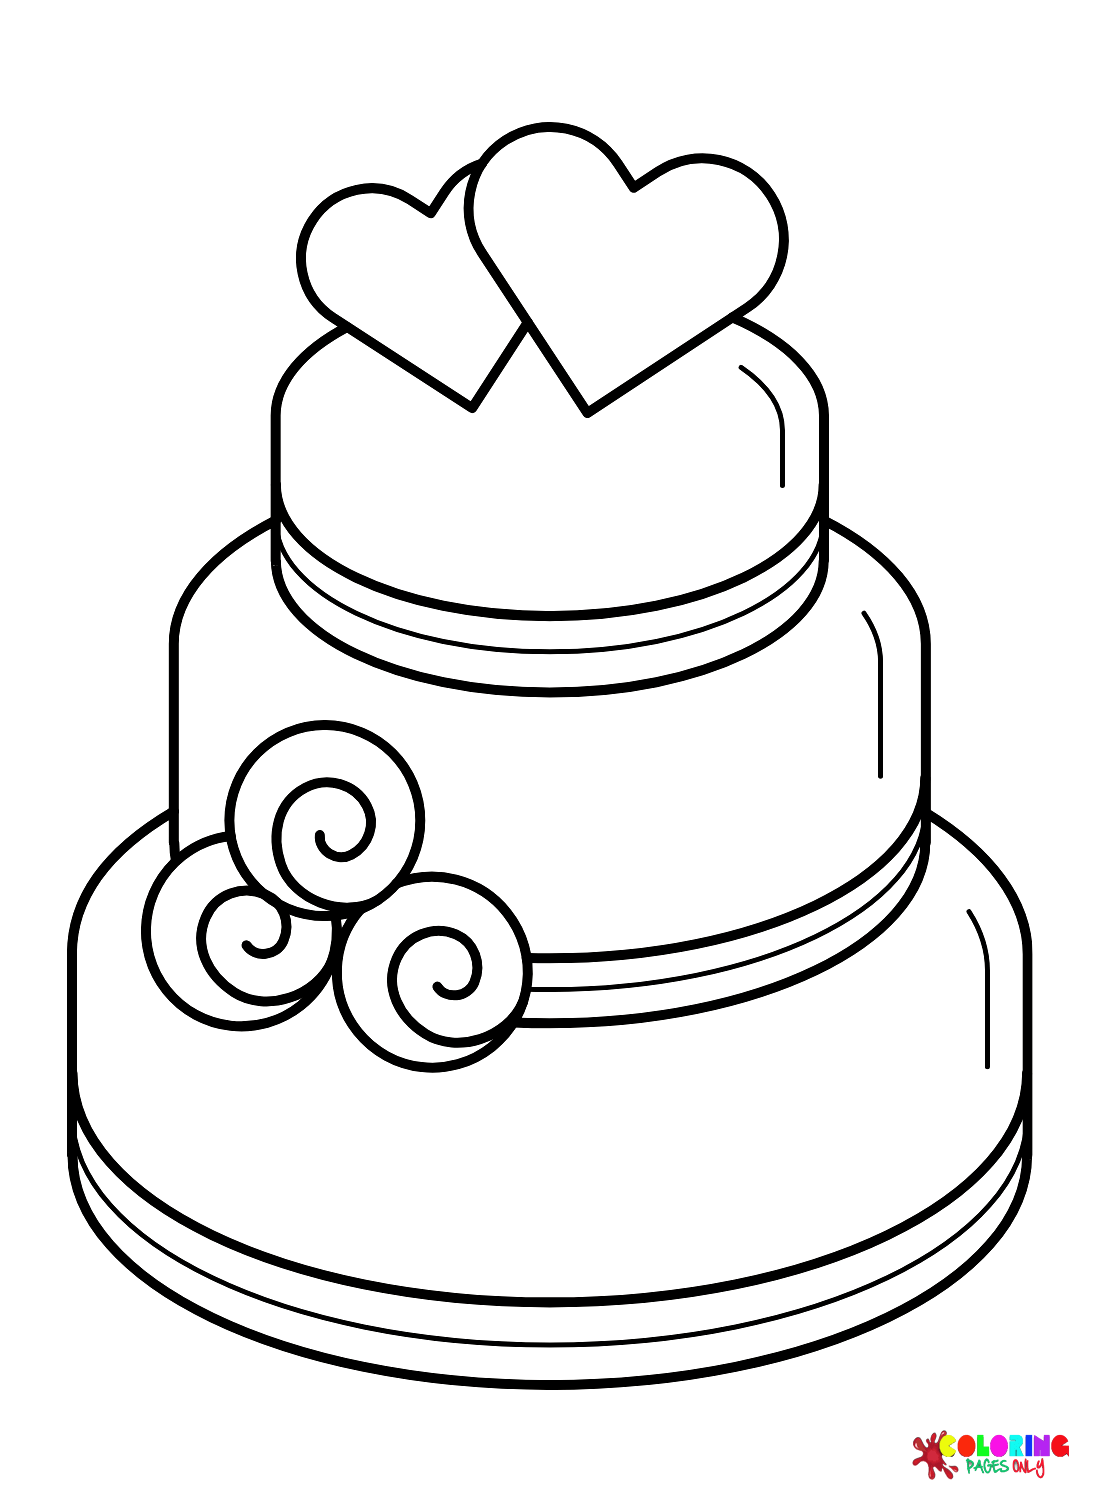 Wedding Cake with Flowers and Hearts Coloring Page